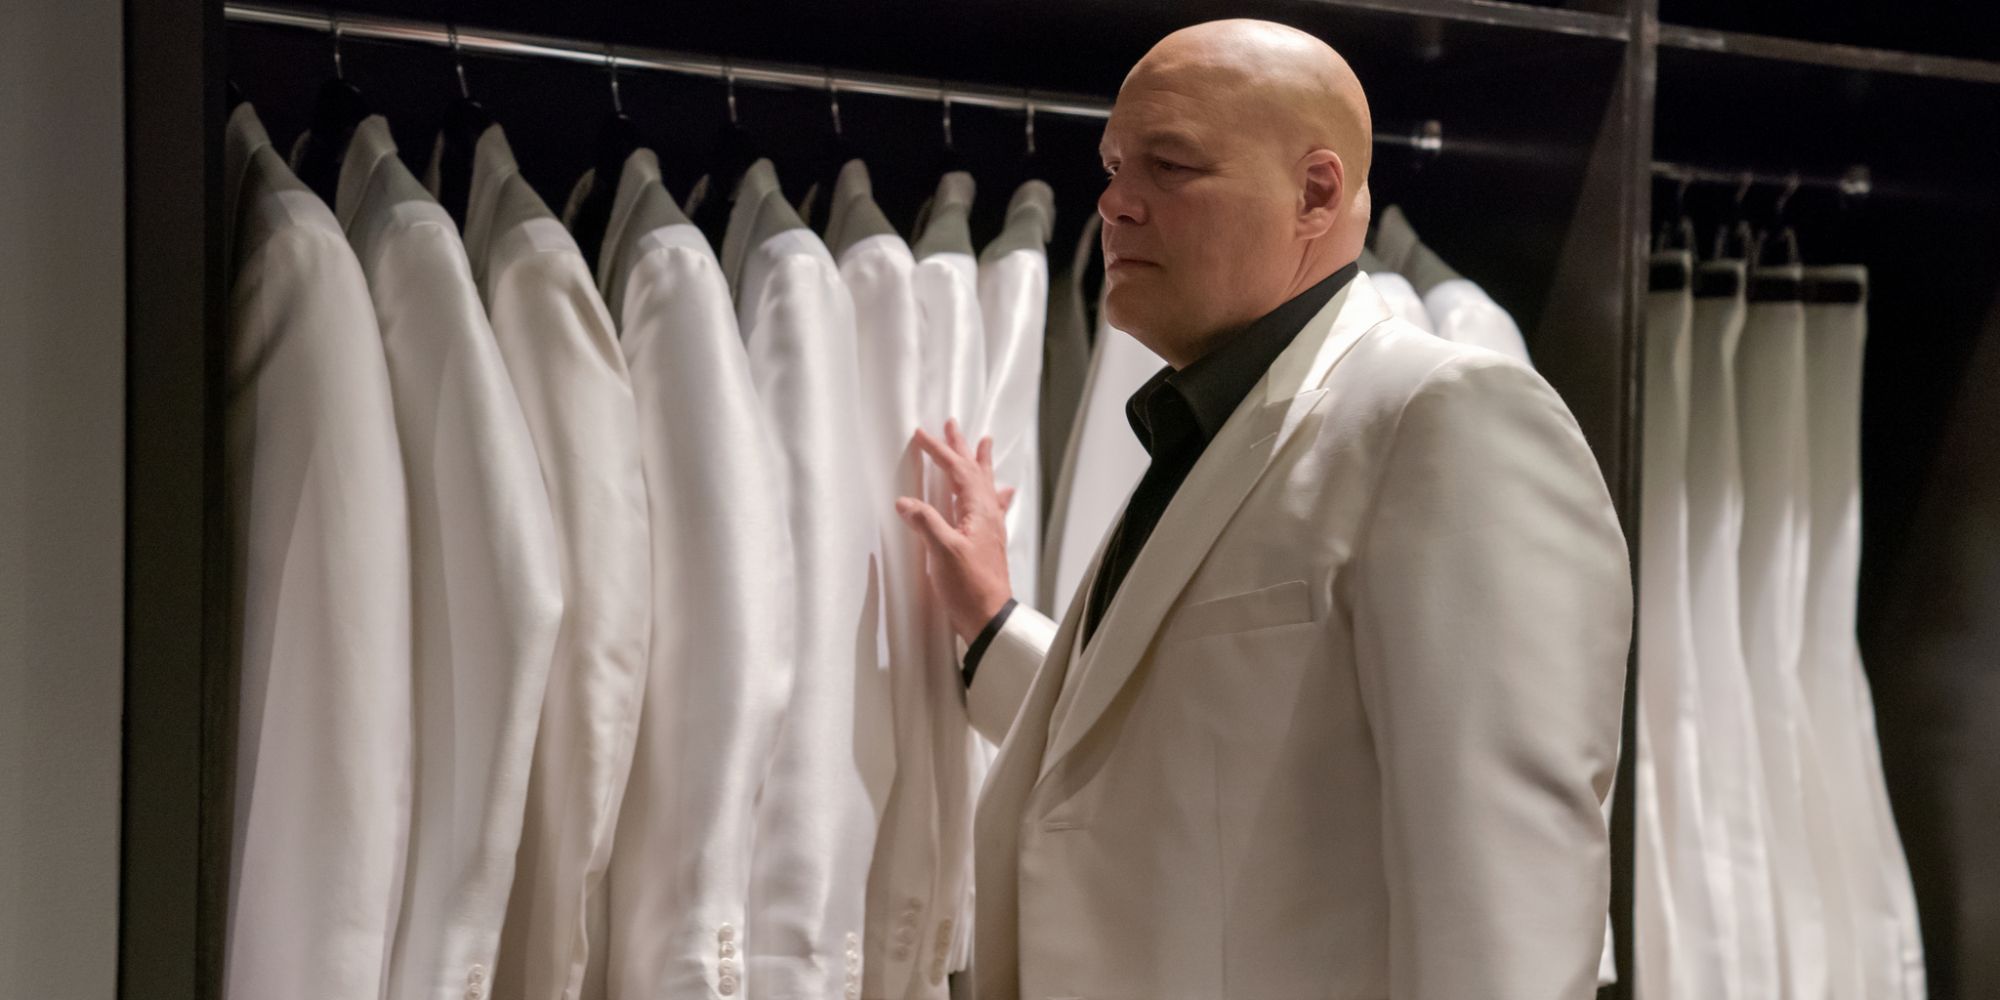 Wilson Fisk (Vincent D'Onofrio) in front of a closet of white suits, touching several in Daredevil